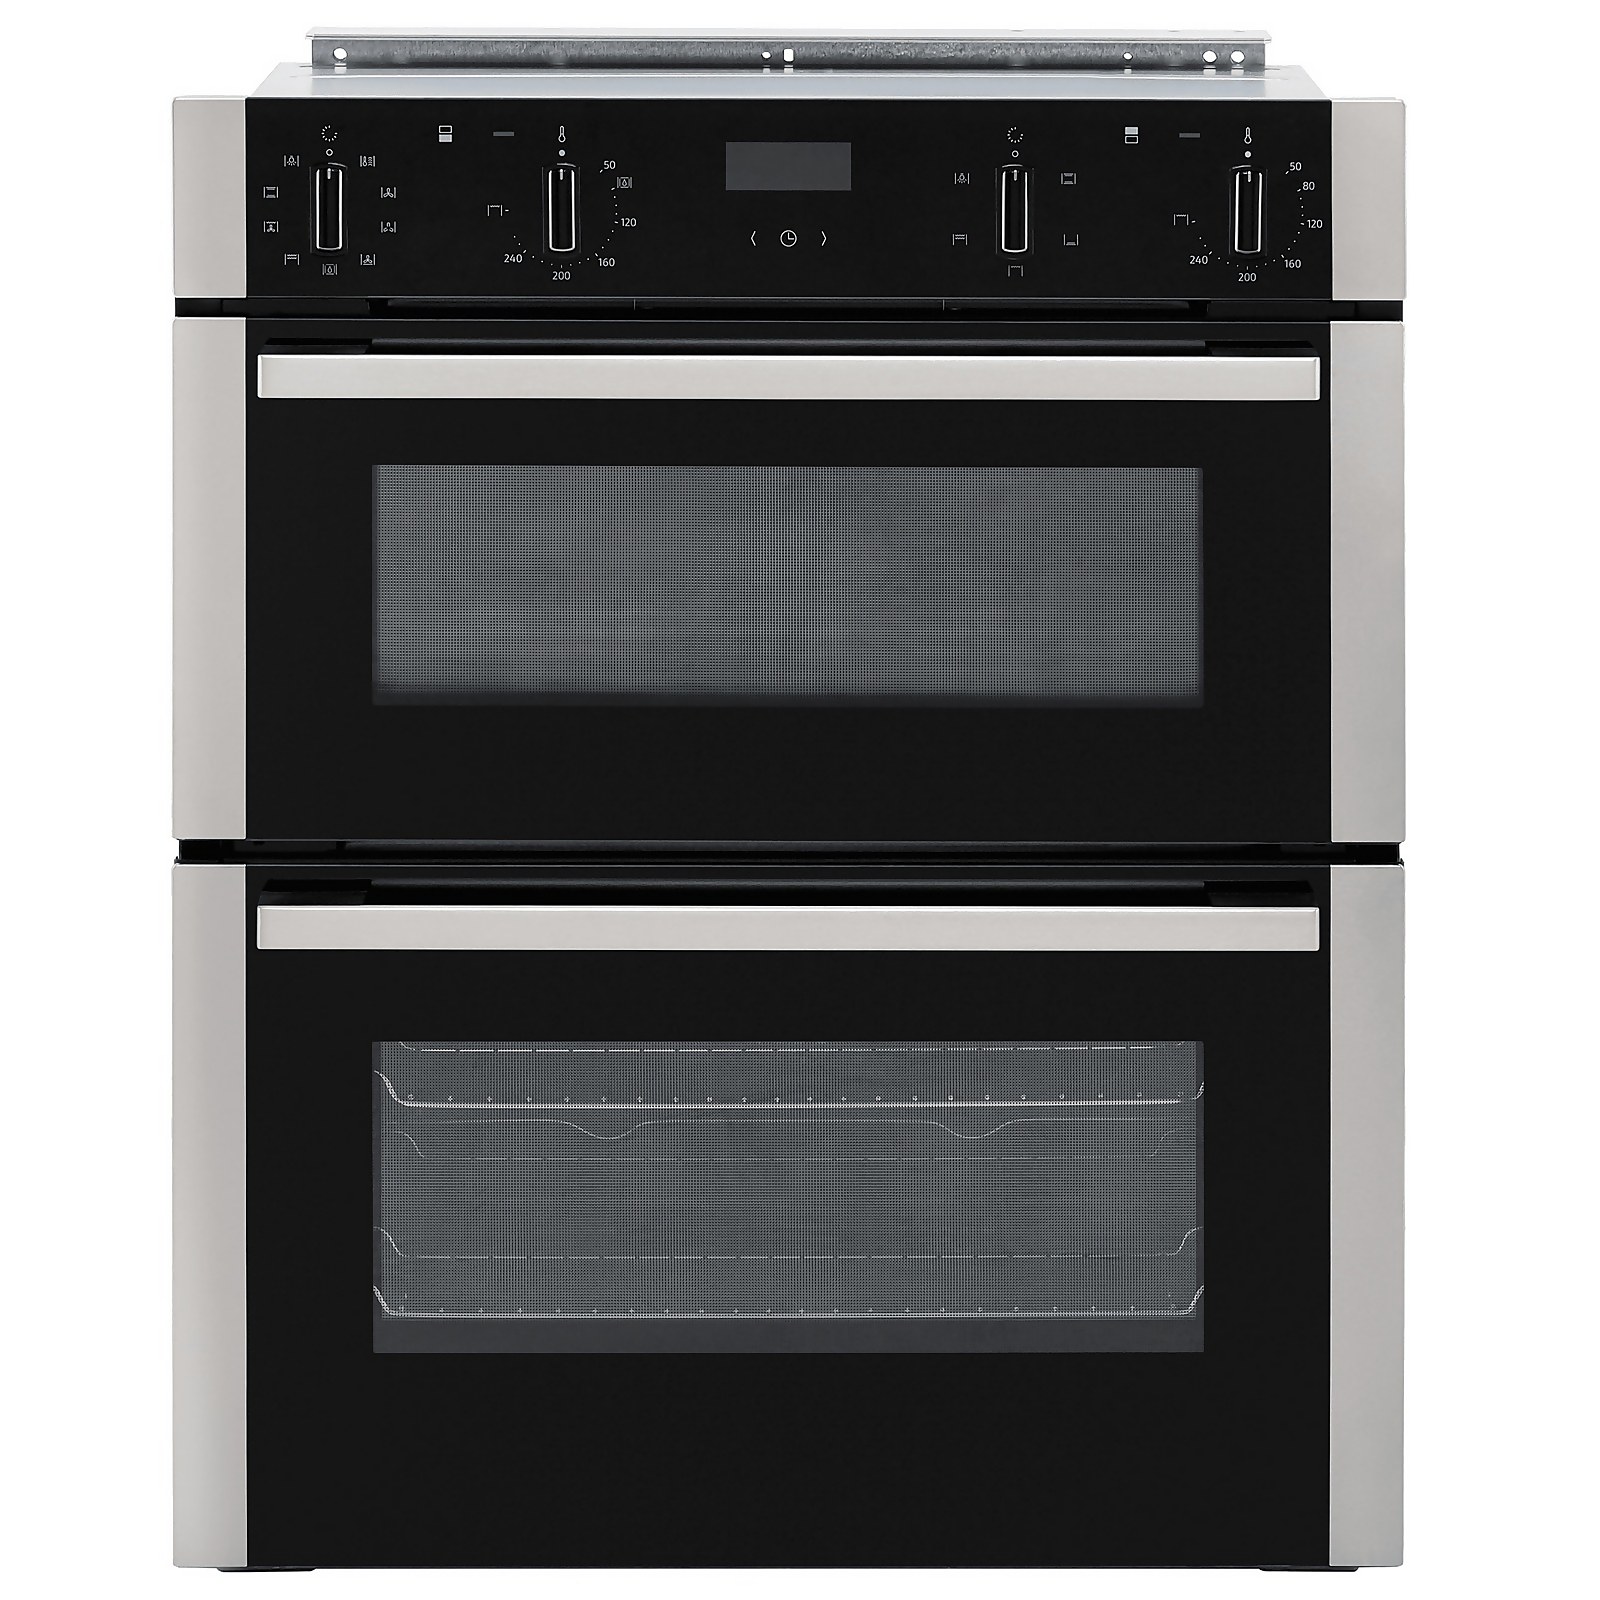 Photo of Neff N50 J1ace2hn0b Built Under Electric Double Oven - Stainless Steel